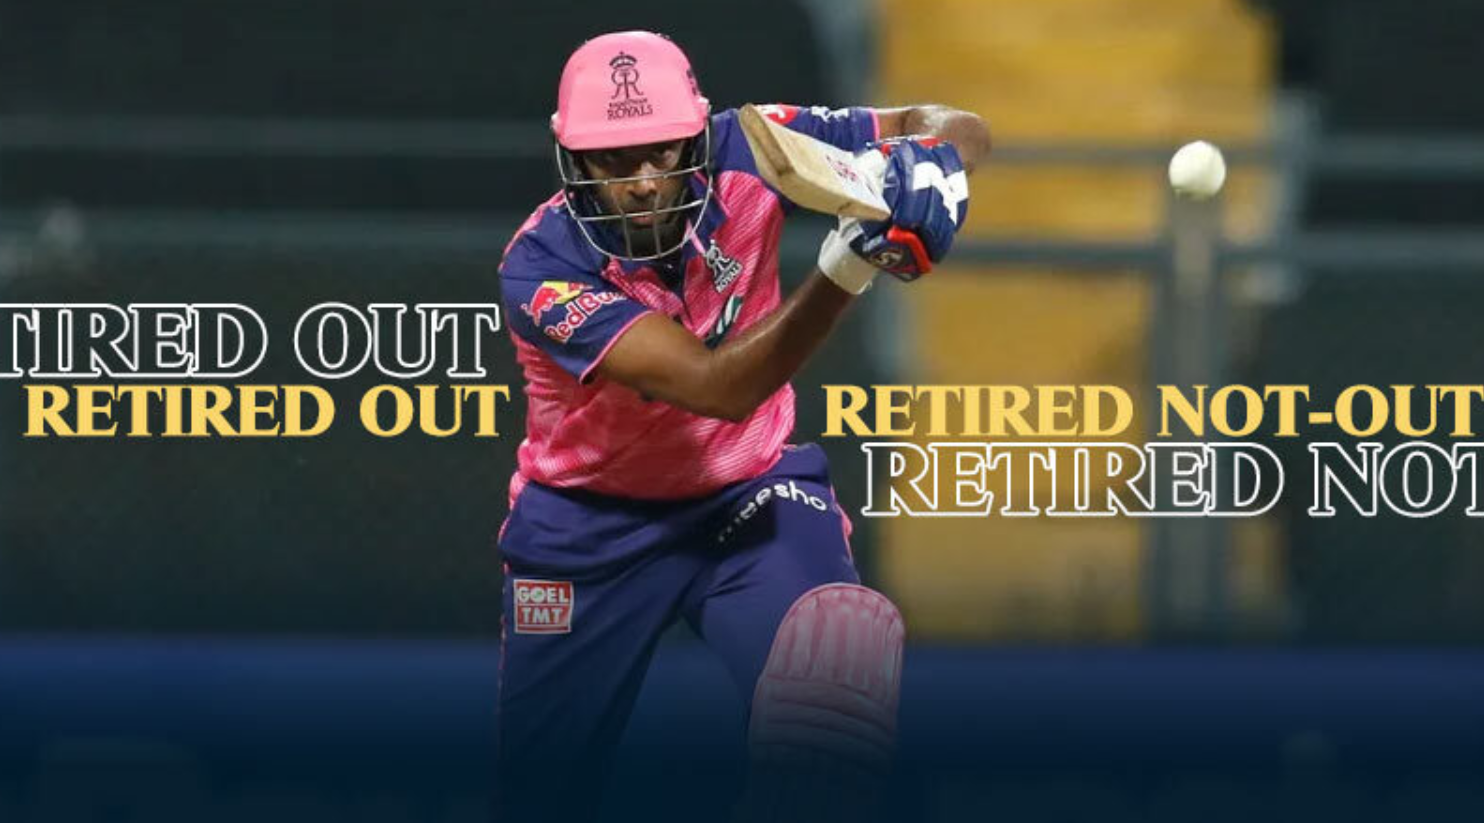 What does it mean to be retired out in cricket?